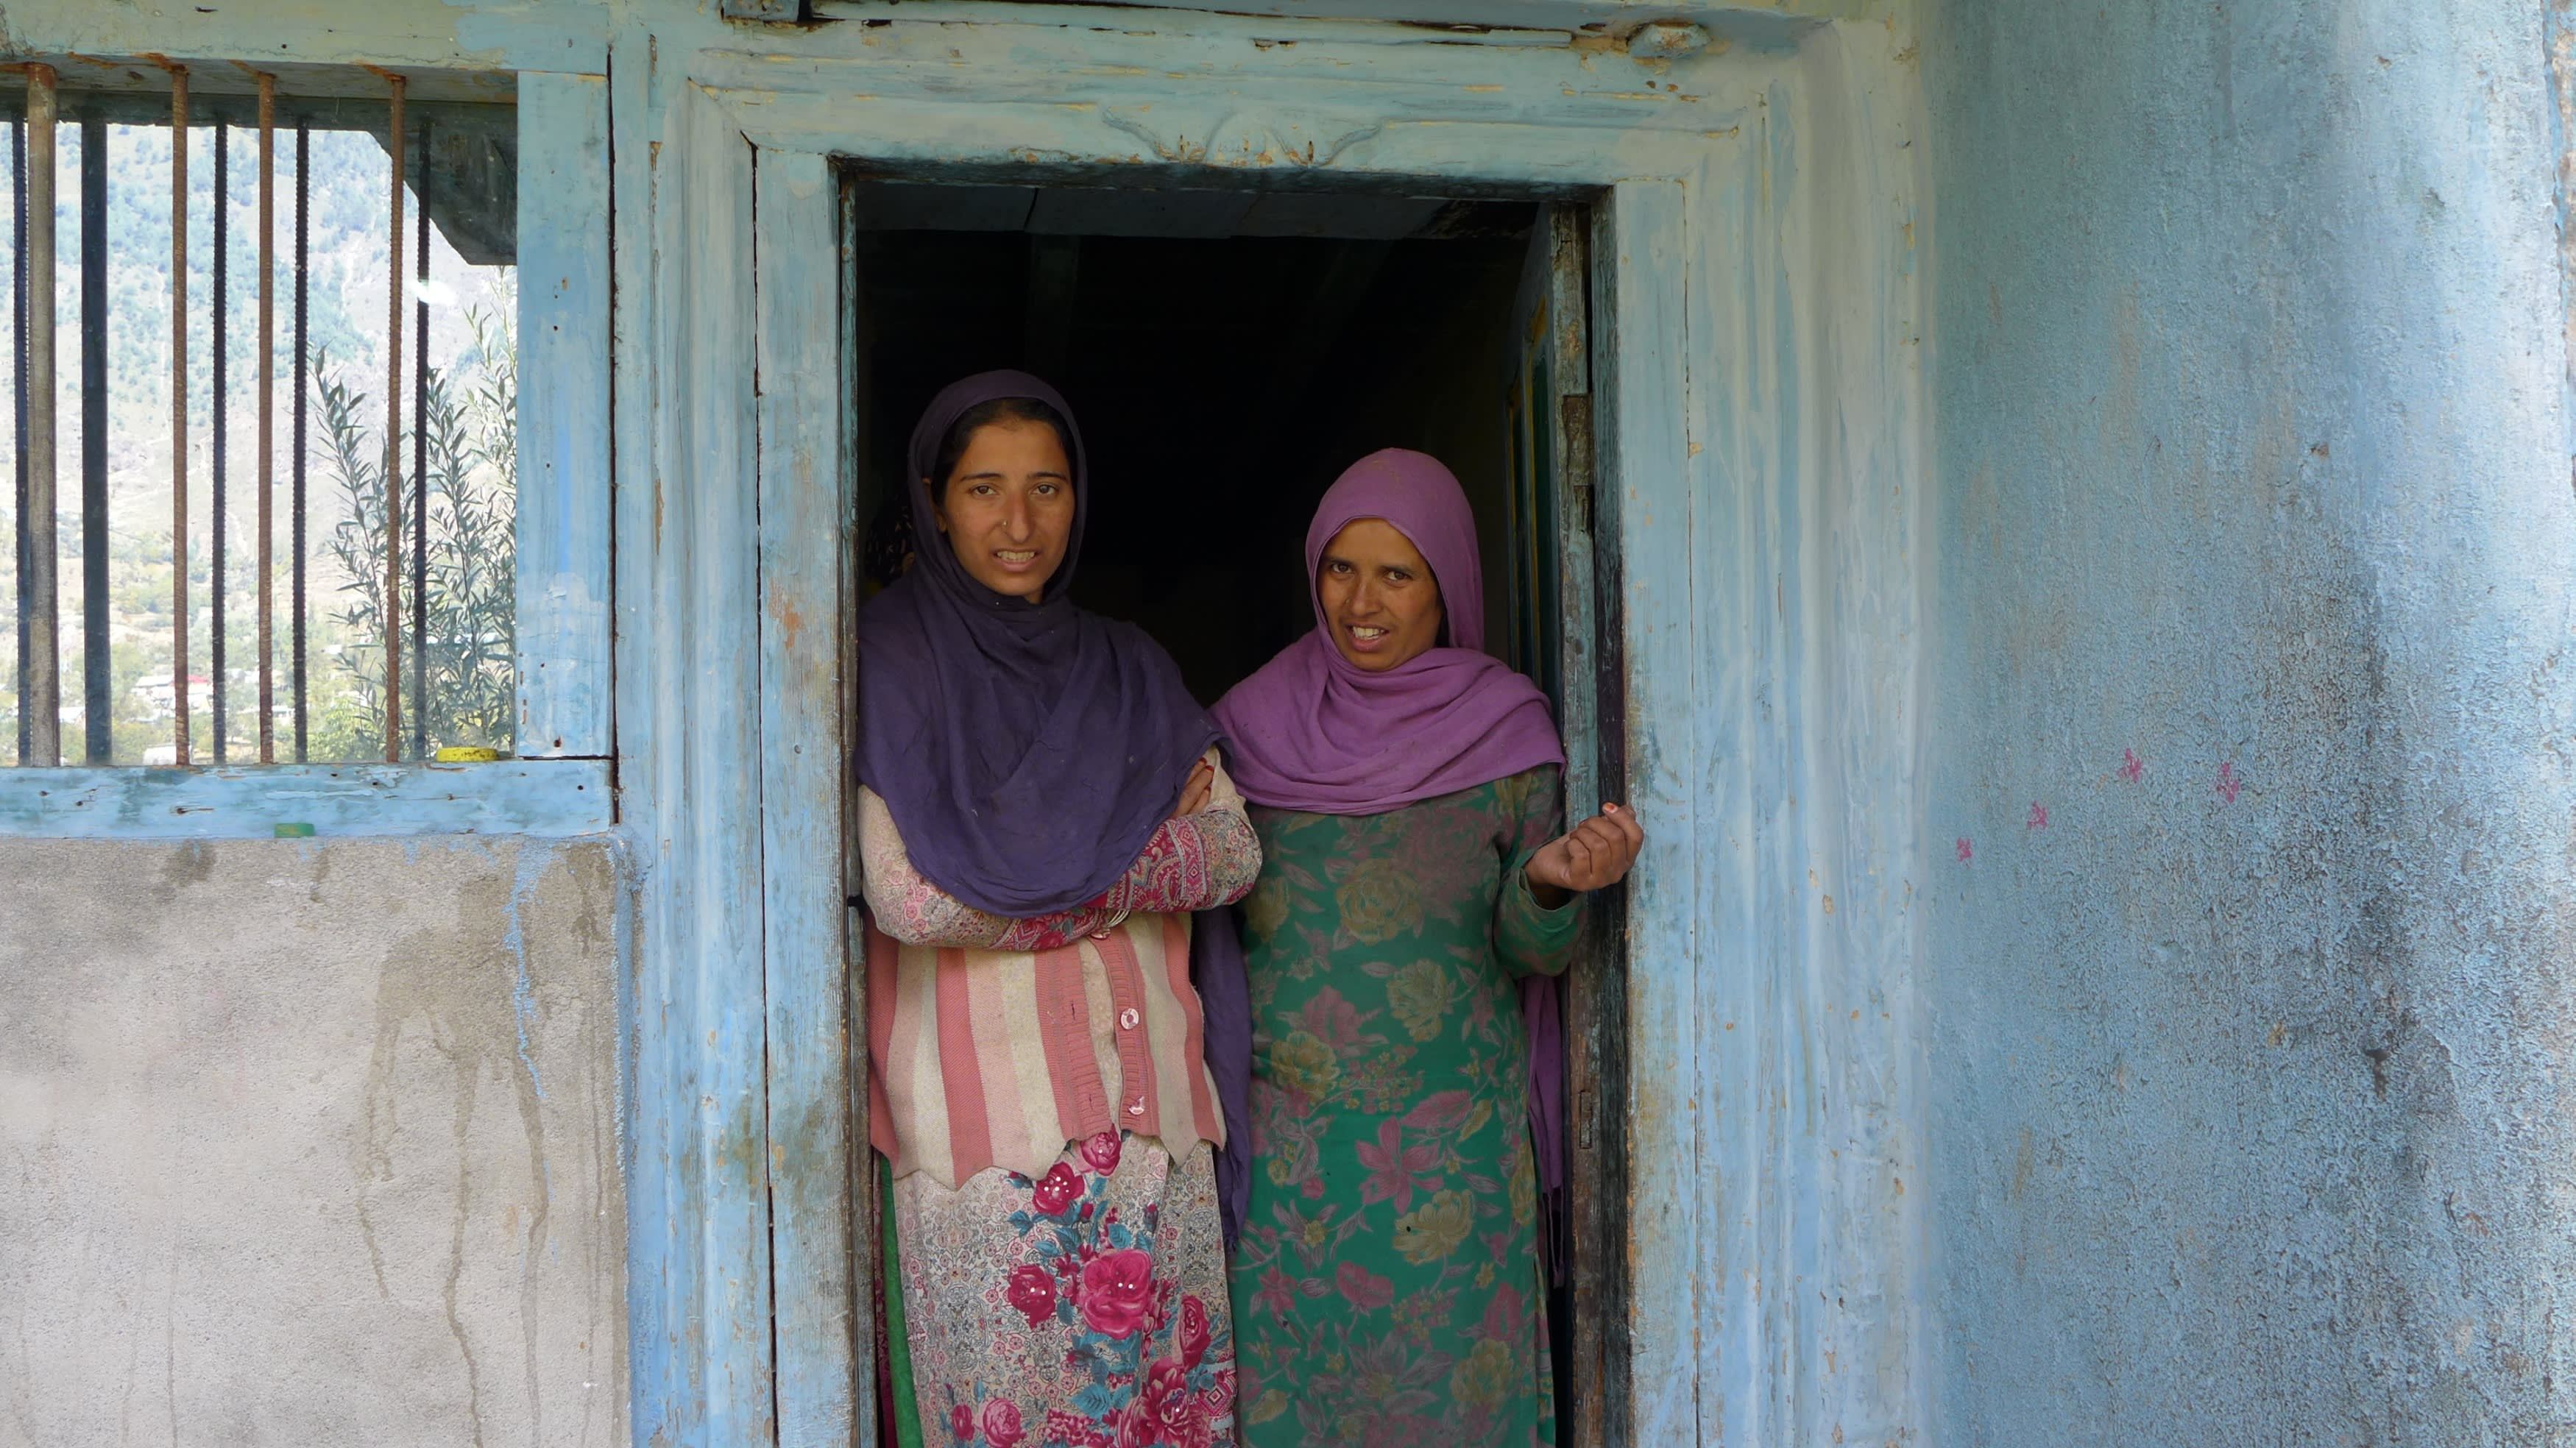 Members of Jammu and Kashmir's Gujjar-Bakerwal ethnic group, Najma Jan and Tahira Akhter say that birth control in their community has such a stigma attached to it that they are unable to raise the subject even with their husbands. Image by Safina Nabi. Kashmir, 2020.
